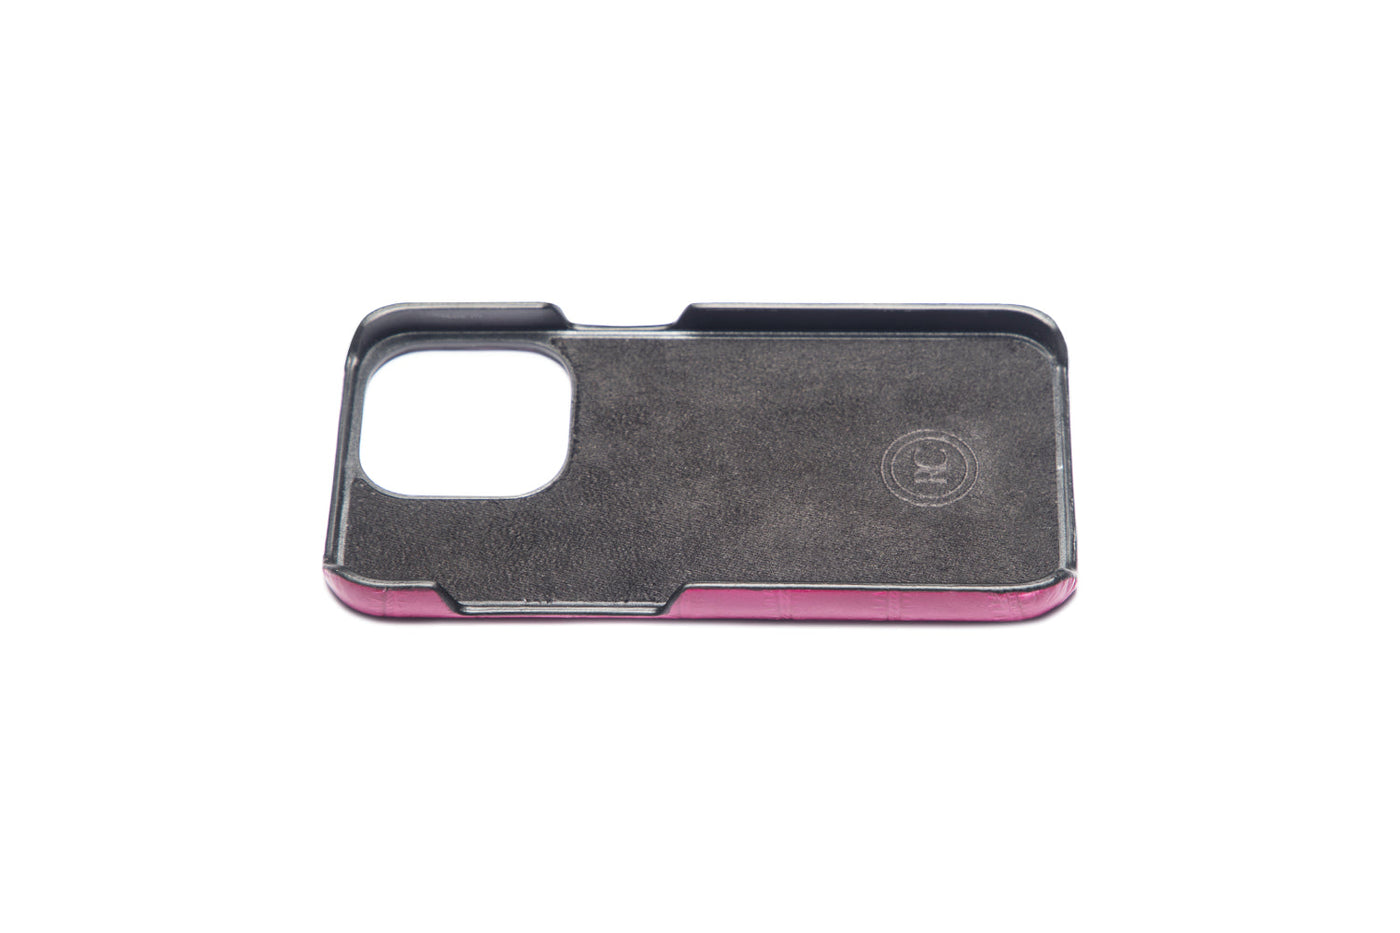 Ombre Pink Leather - iPhone 12/ 12 Pro Case